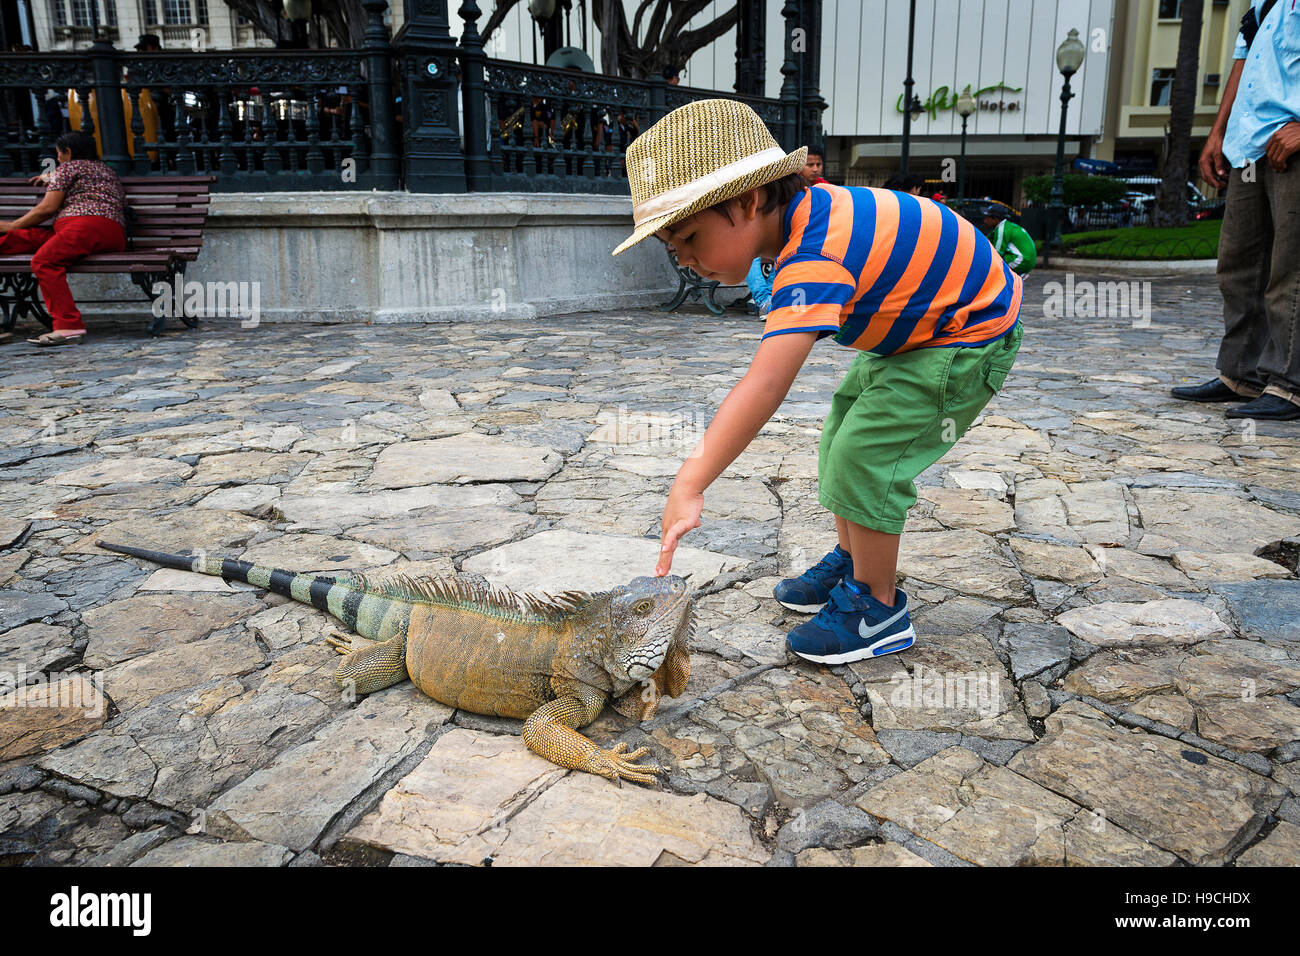 Guayaquil, Ecuador - January 21, 2014: Child playing with an iguana in the Parque Bolívar in Guayaquil, Ecuador. Stock Photo